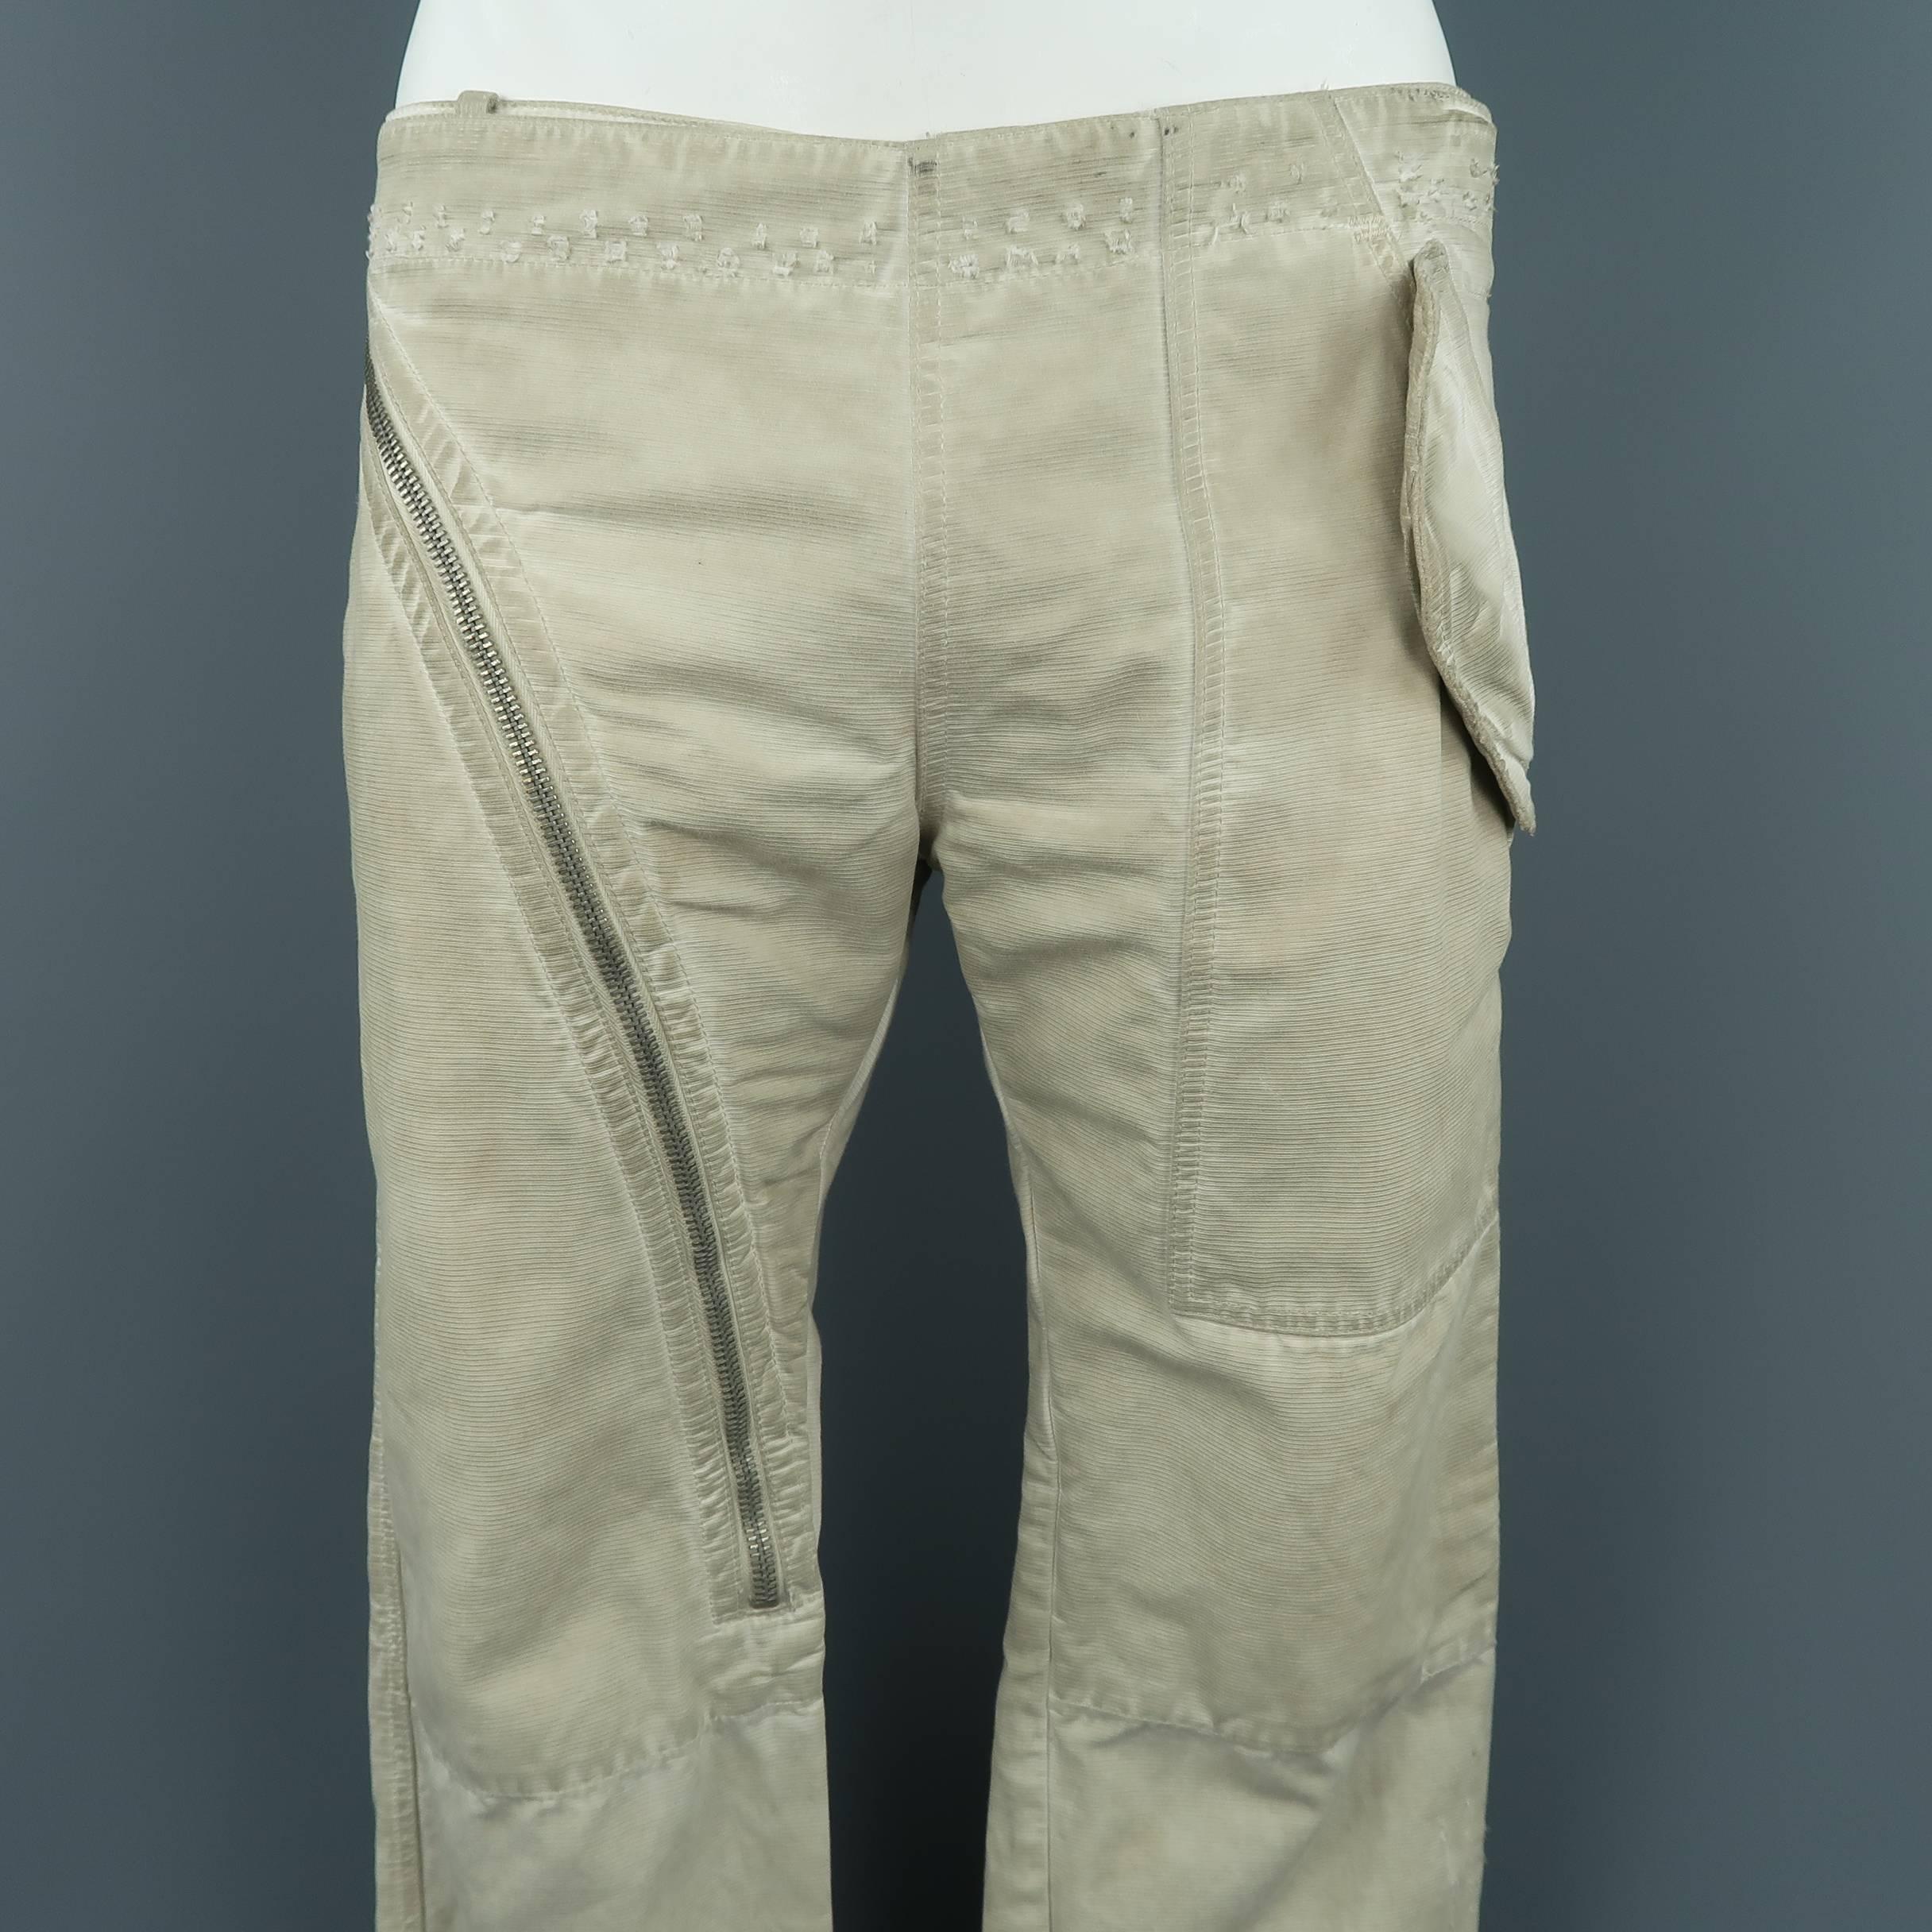 DRKSHDW by Rick Owens pants comes in dirty wash distressed textured denim with flap pockets and zip over panel closure. Made in Italy.
 
Good Pre-Owned Condition.
Marked: 31
 
Measurements:
 
Waist: 34 in.
Rise: 9 in.
Inseam:  34 in.
